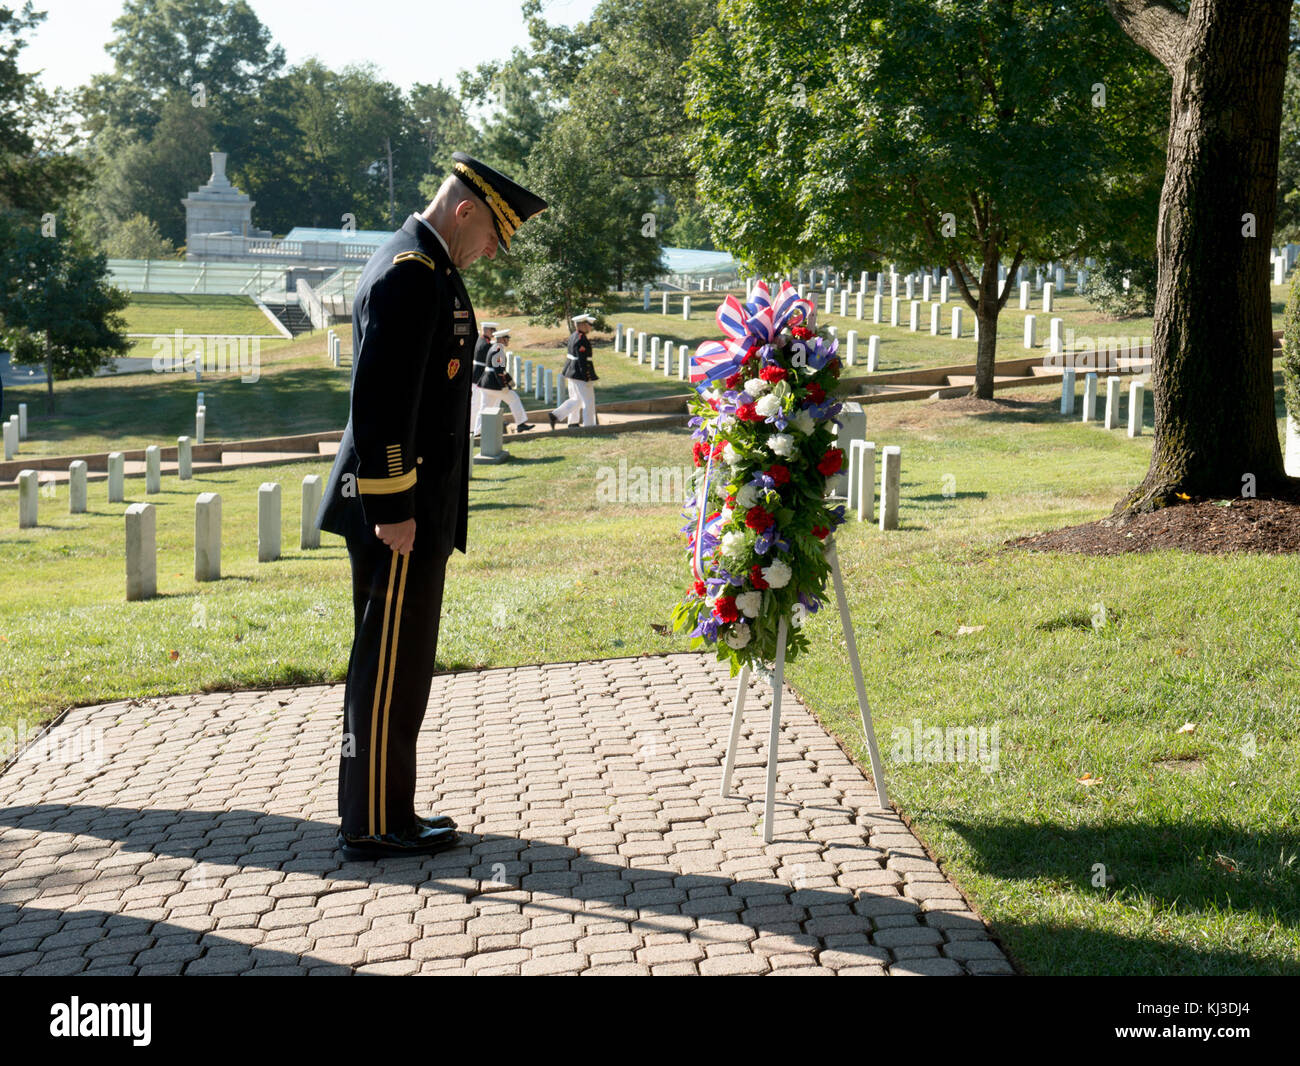 The U.S. Army Military District of Washington conducts a Presidential Armed Forces Full Honor Wreath-Laying Ceremony at the grave of President William H. Taft in Arlington National Cemetery to celebrate his 158th birt 0097 Stock Photo